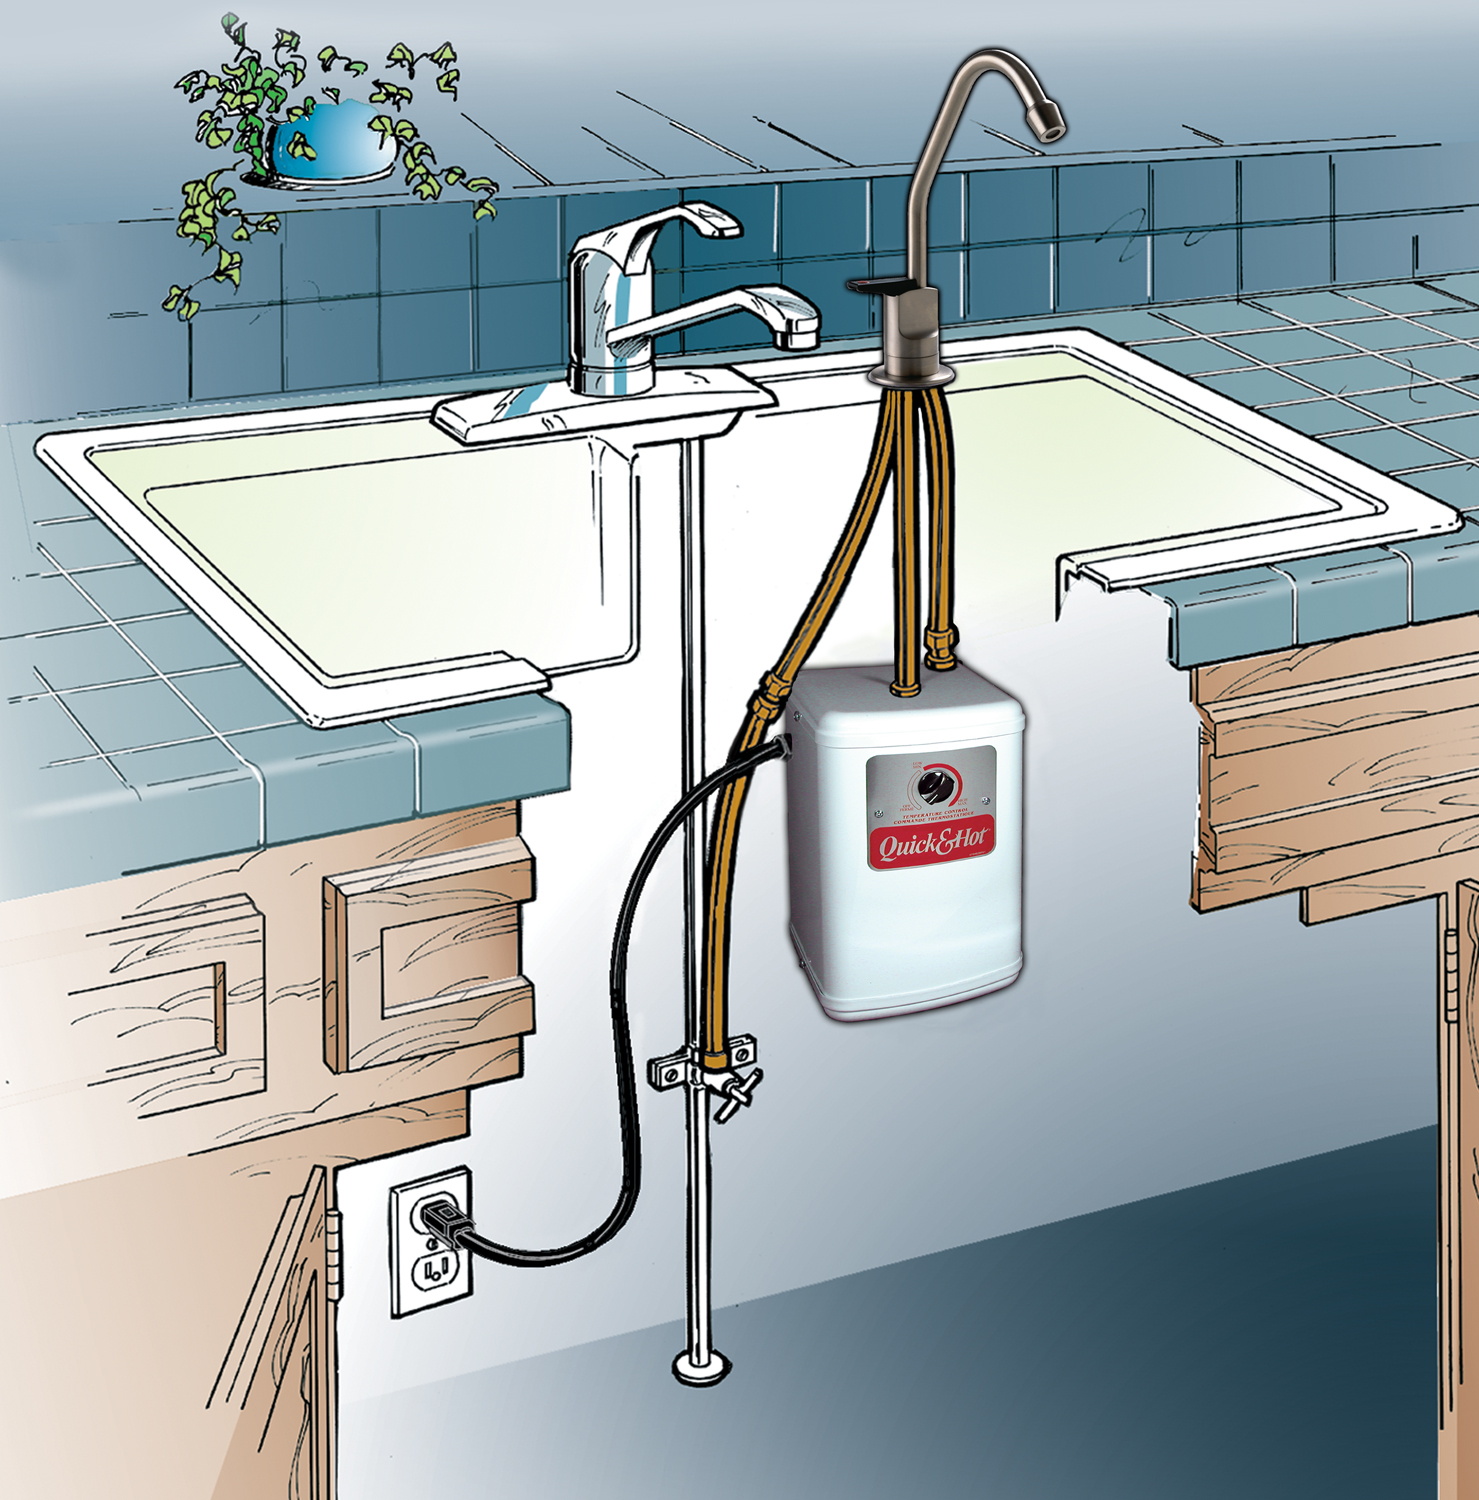 James Dulley: Sink-mounted hot water dispensers provide hot water instantly